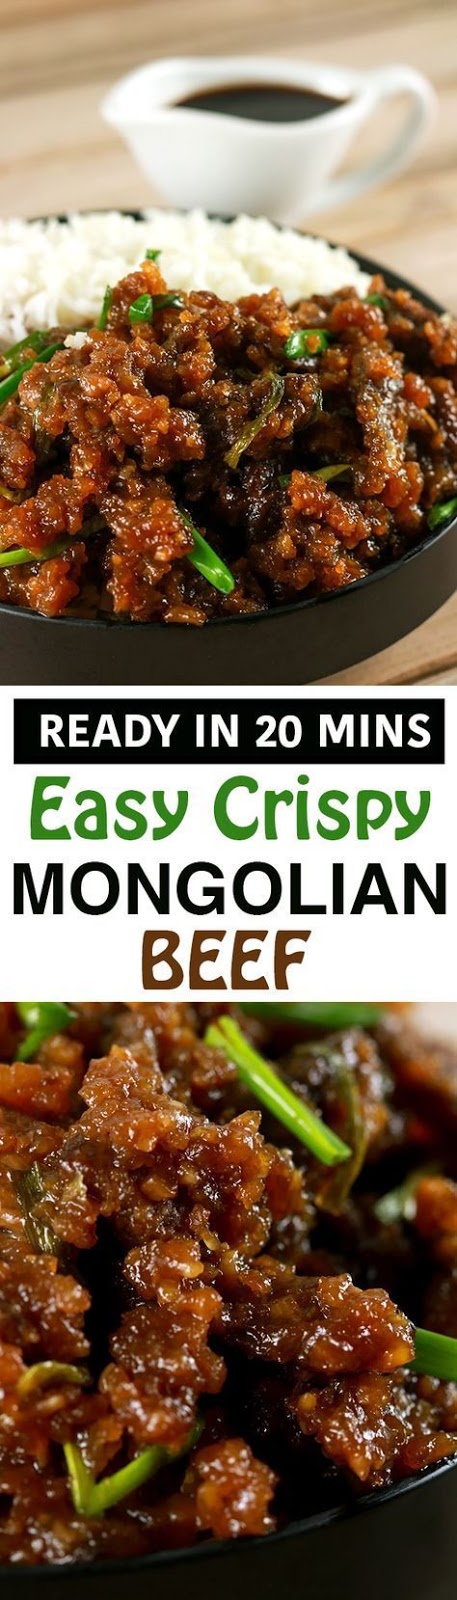 This Mongolian Beef recipe is super easy to make and uses simple, readily available ingredients! Whip this up in under 20 minutes and have the perfect mid-week dinner meal!